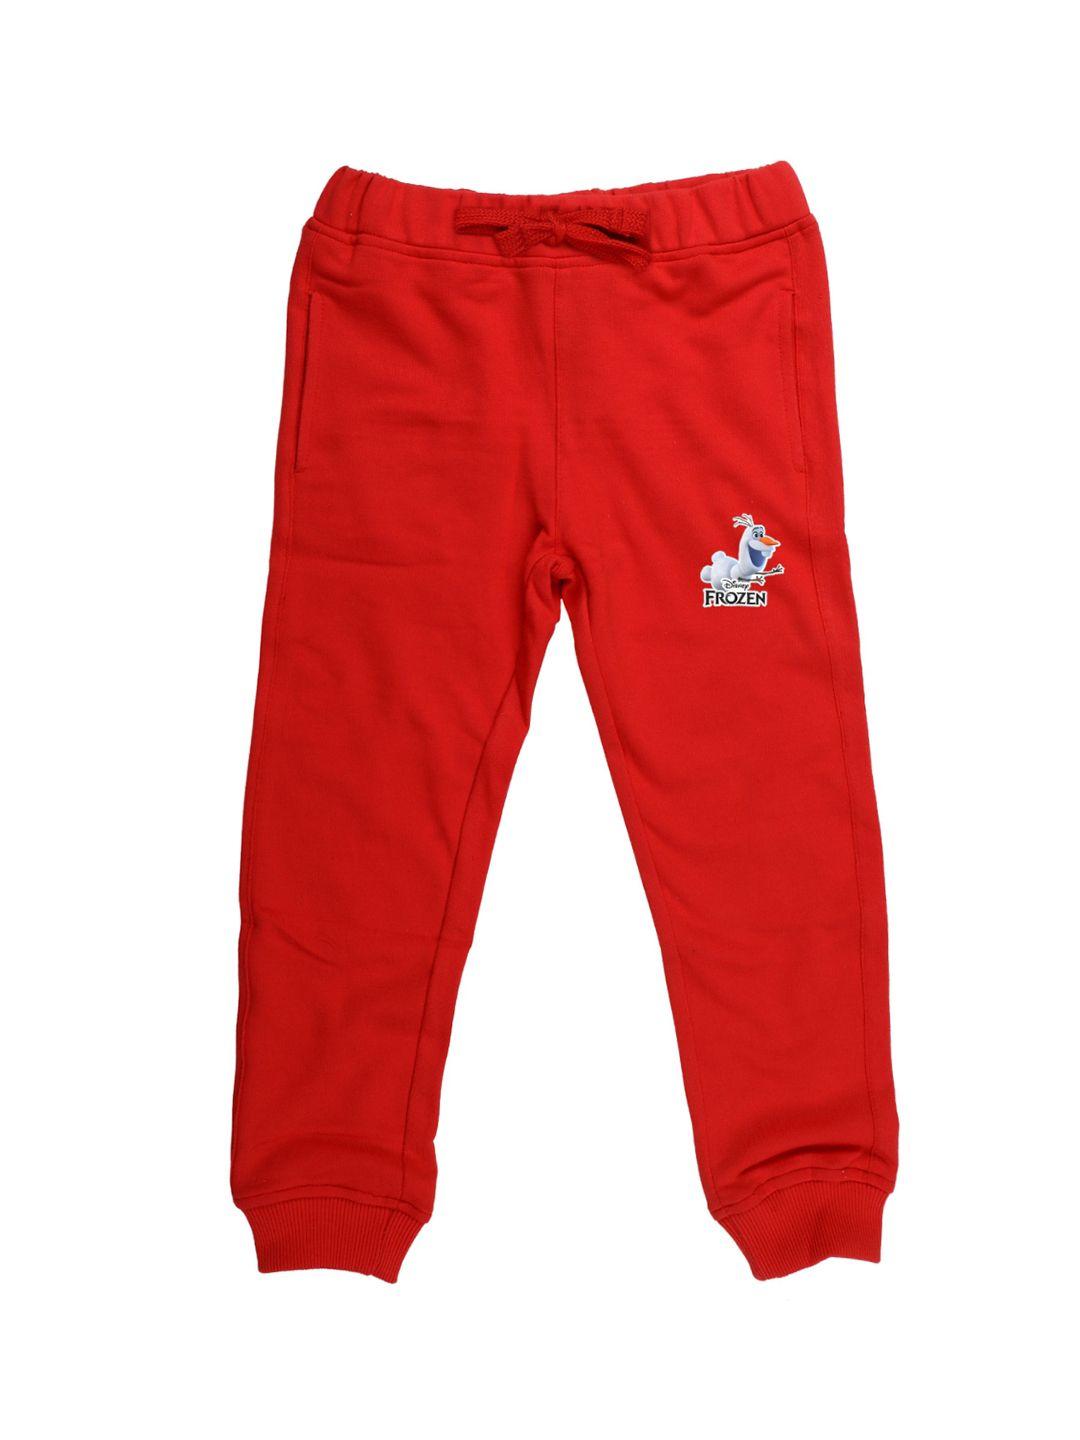 disney by wear your mind kids red solid joggers